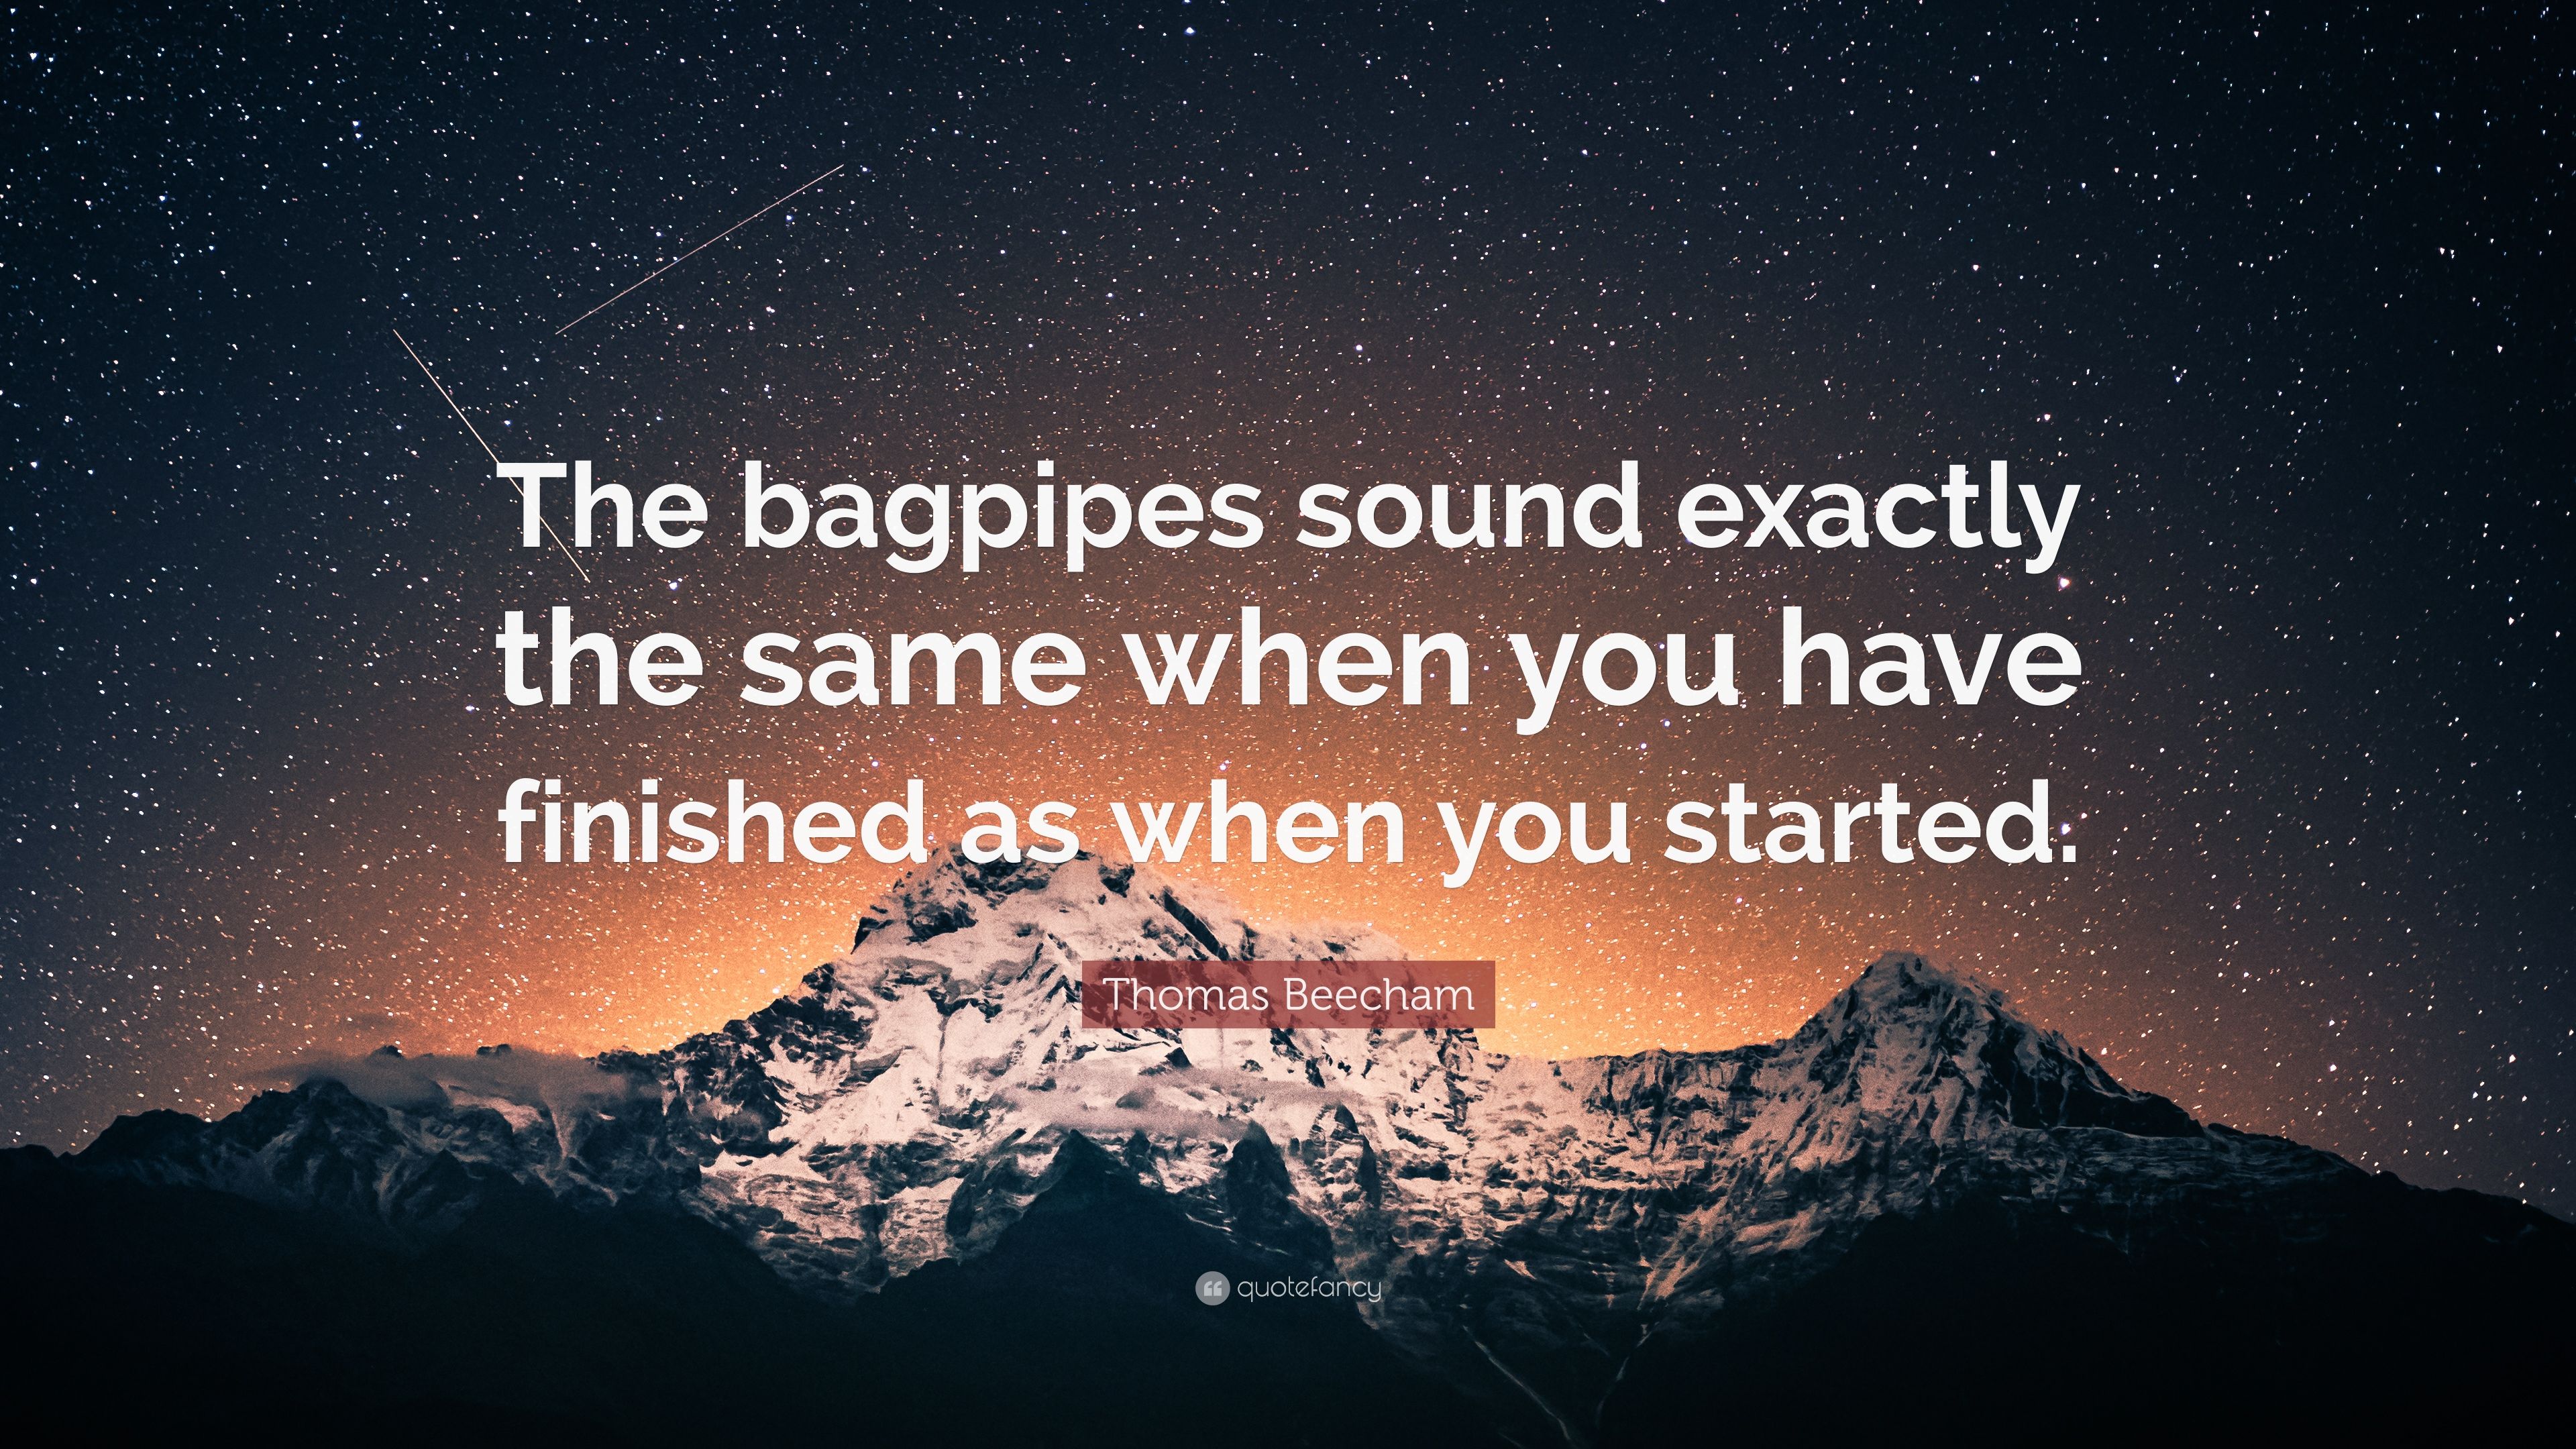 Thomas Beecham Quote: “The bagpipes sound exactly the same when you